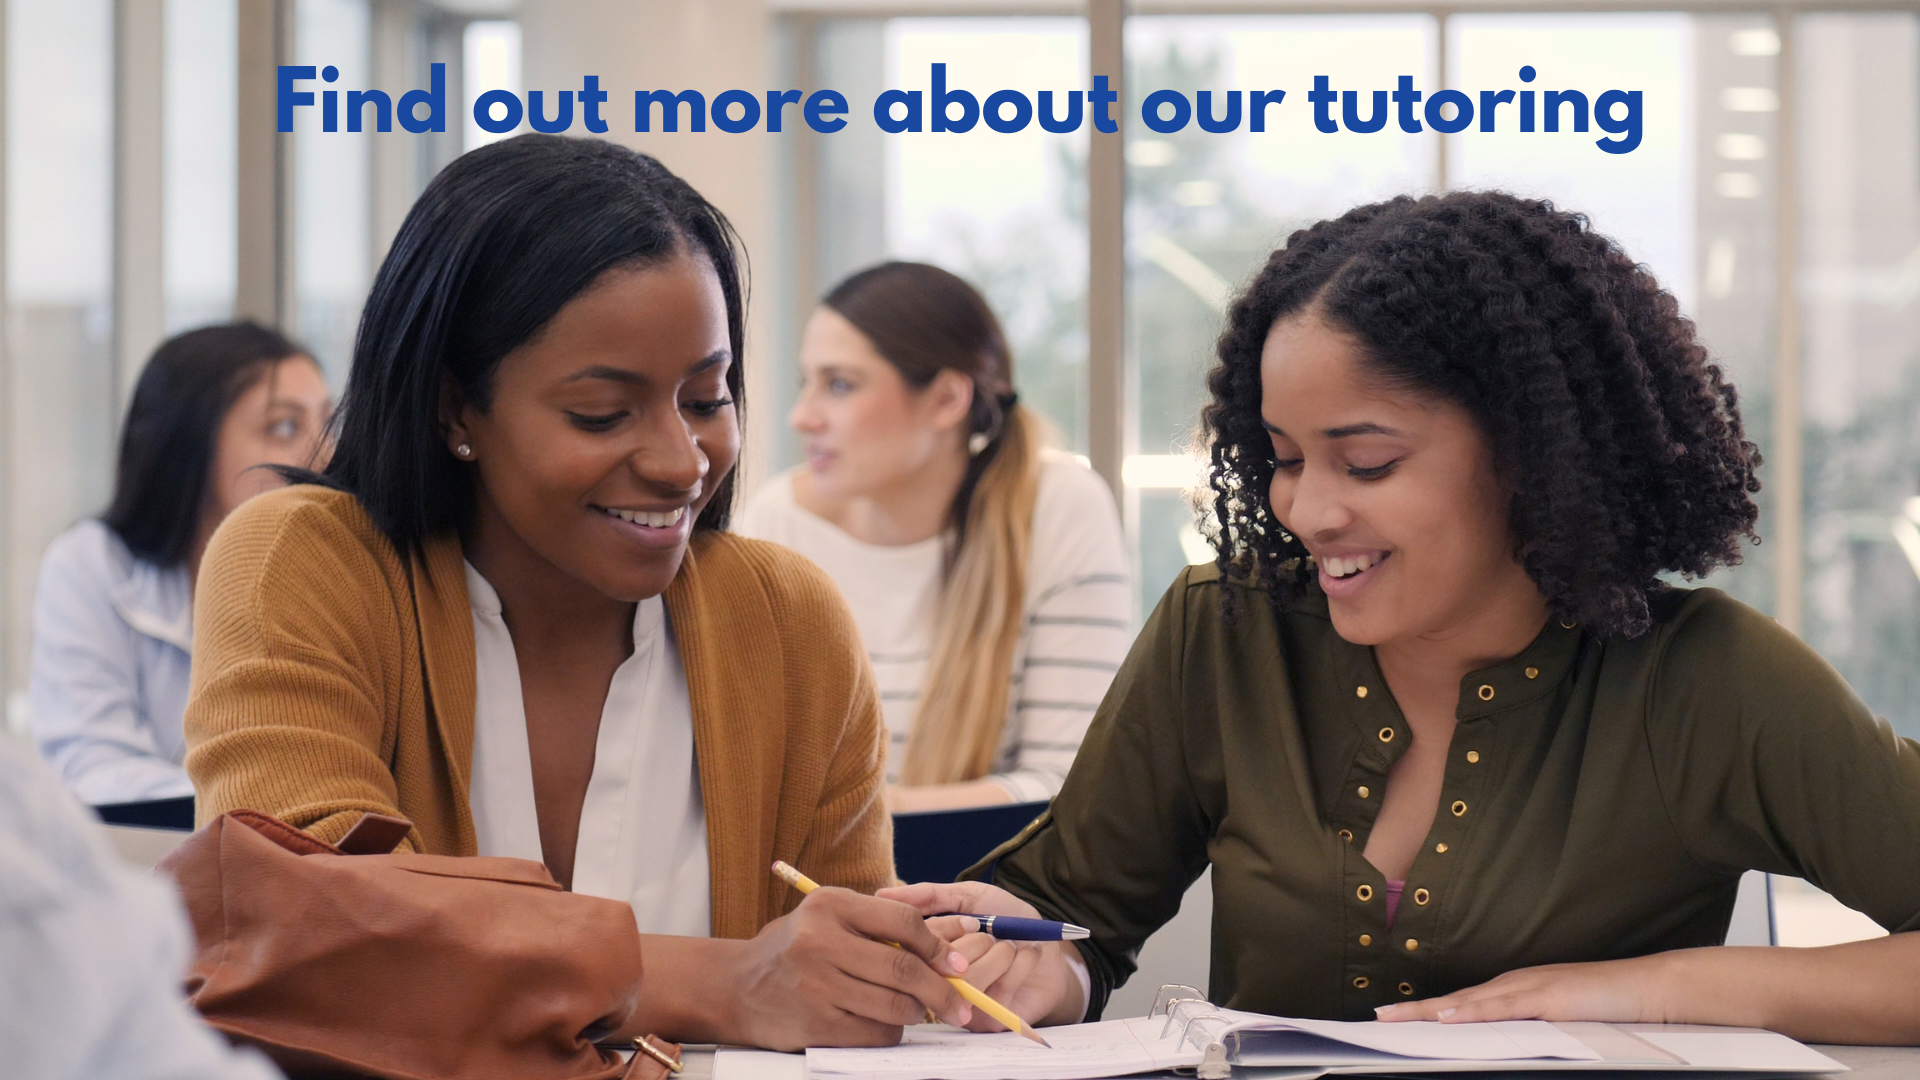 Up to 10% discount on your one-on-one tutoring